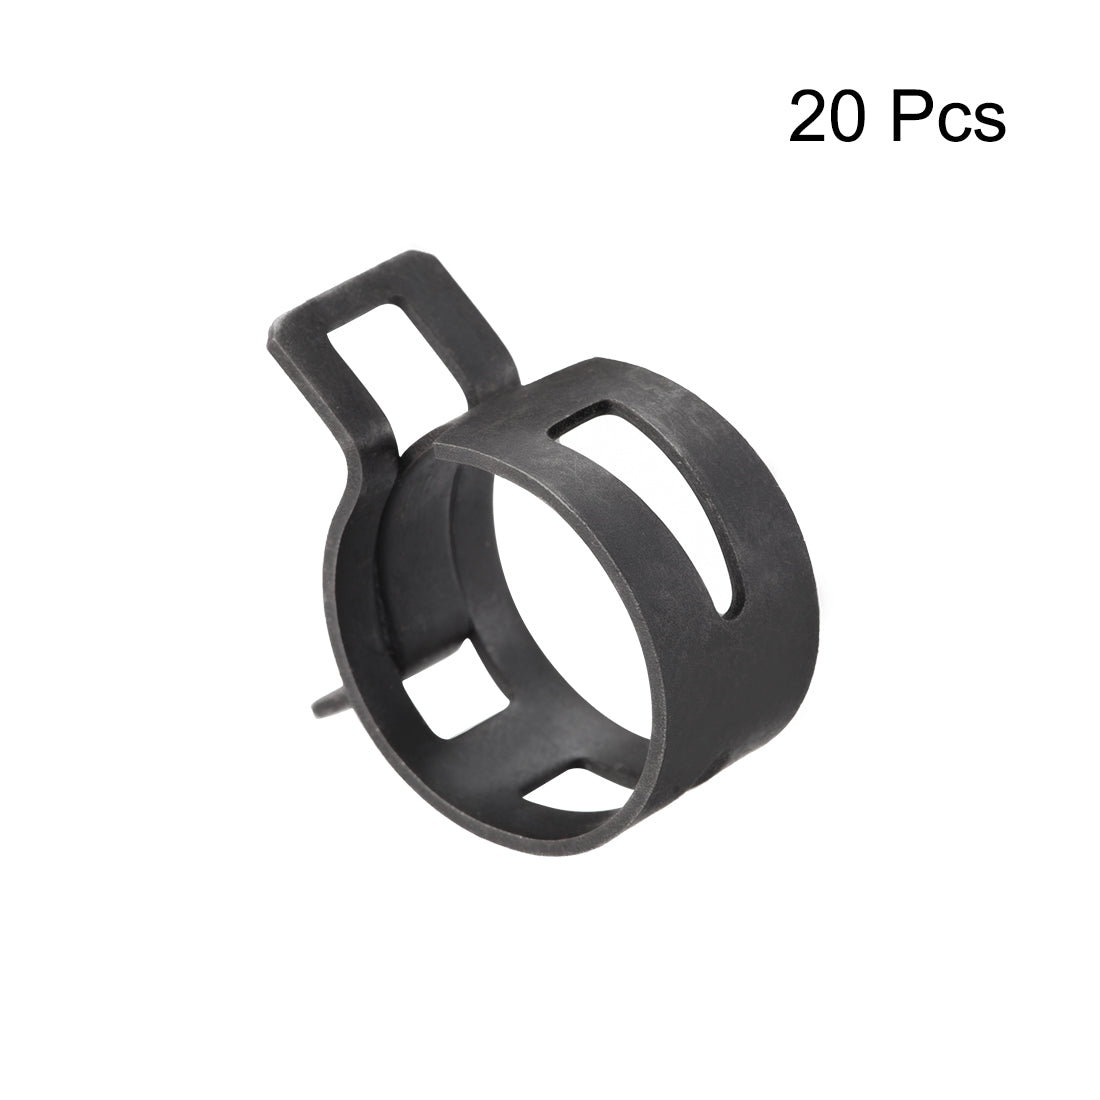 uxcell Uxcell Steel Band Clamp 19mm for Fuel Line Silicone Hose Tube Spring Clips Clamp Black Manganese Steel 20Pcs